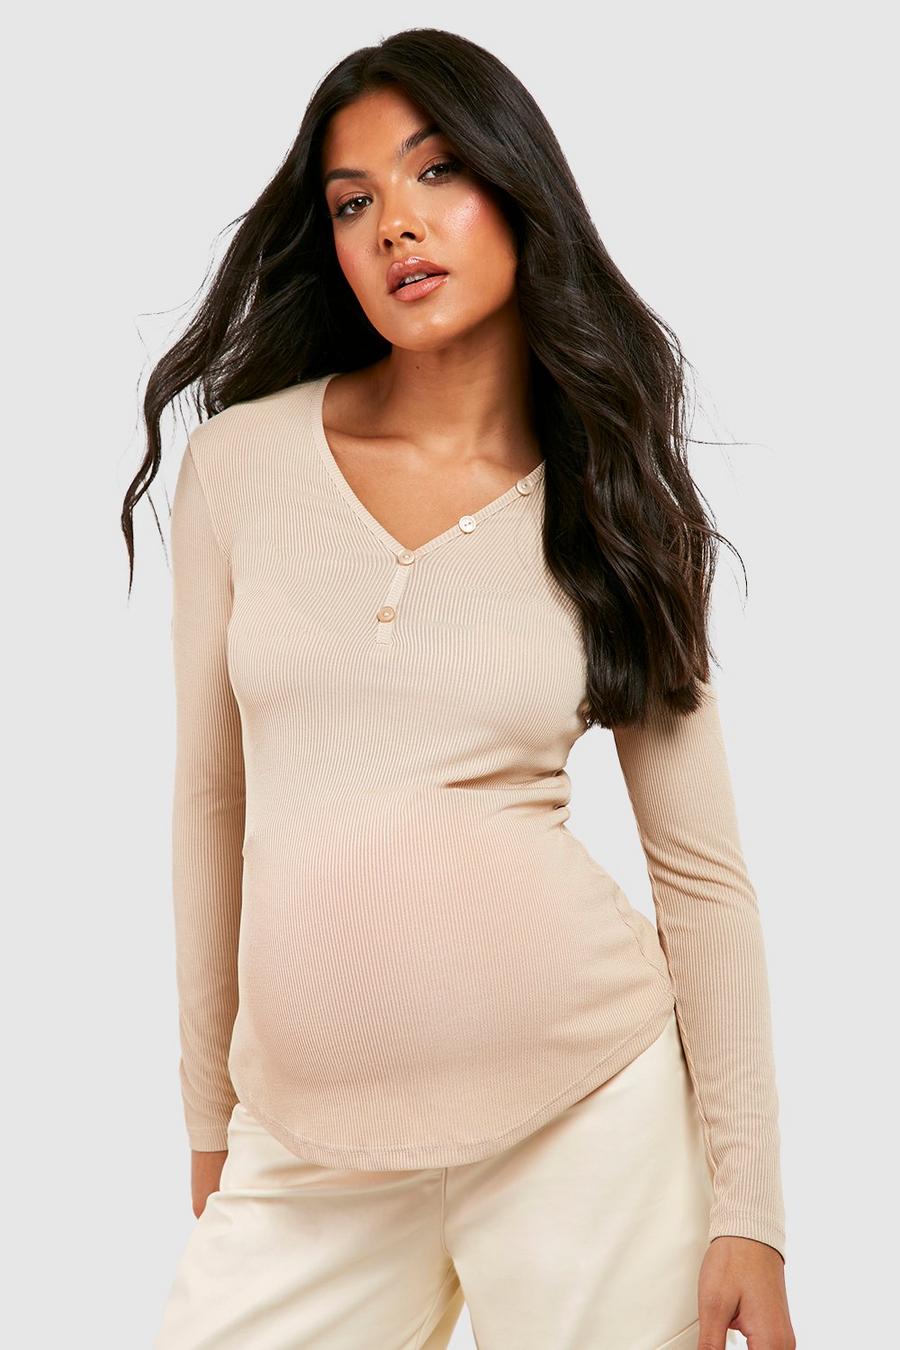 Vivinew Women's Maternity Tops Long Sleeve Side Ruched Criss Cross V-Neck Pregnancy Tunic Shirts 